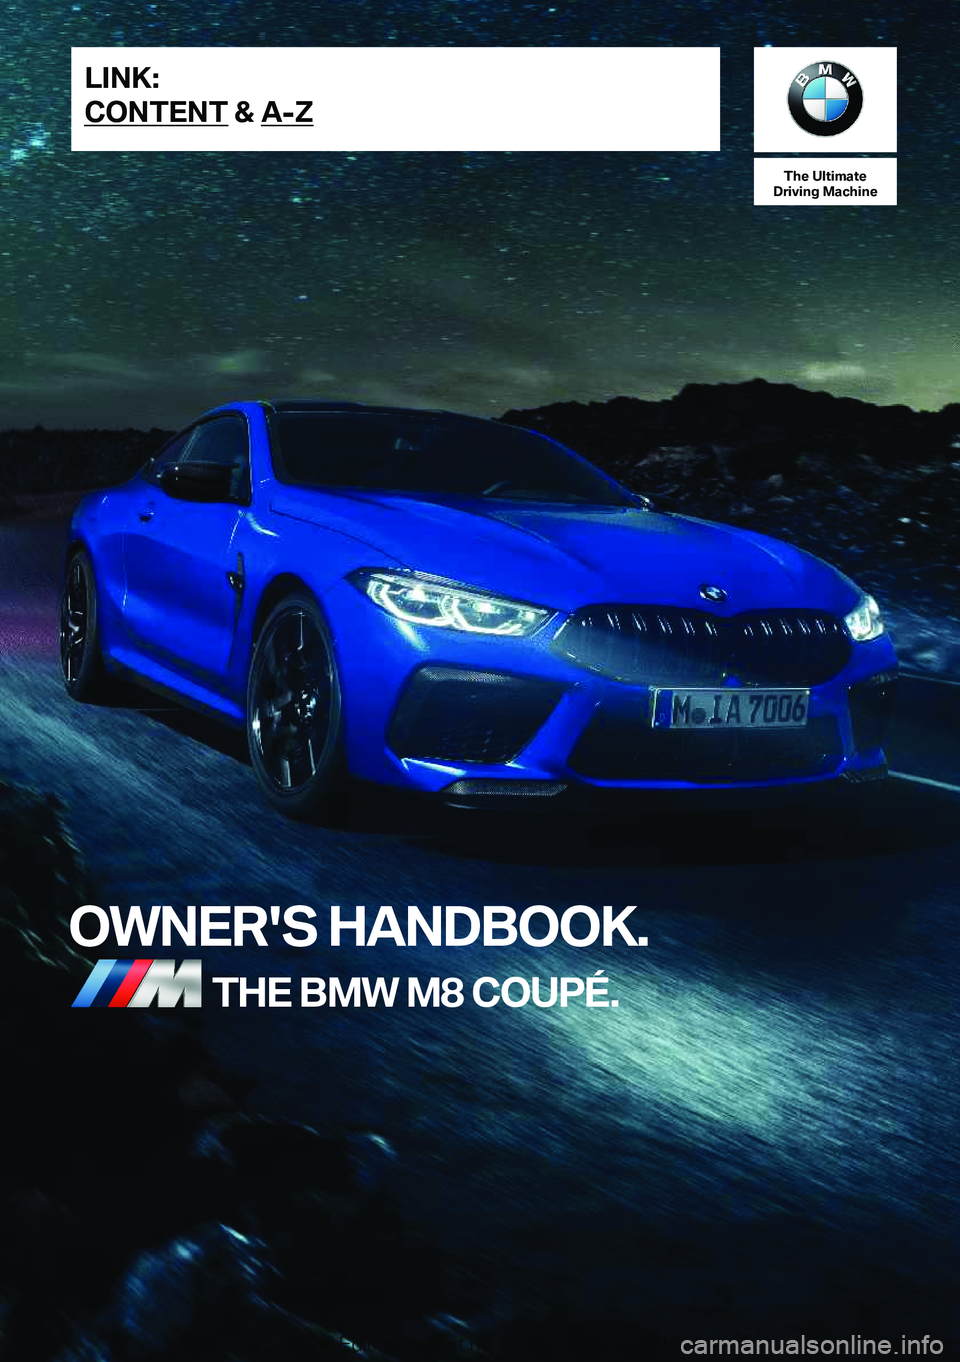 BMW M8 2020  Owners Manual �T�h�e��U�l�t�i�m�a�t�e
�D�r�i�v�i�n�g��M�a�c�h�i�n�e
�O�W�N�E�R�'�S��H�A�N�D�B�O�O�K�.�T�H�E��B�M�W��M�8��C�O�U�P�